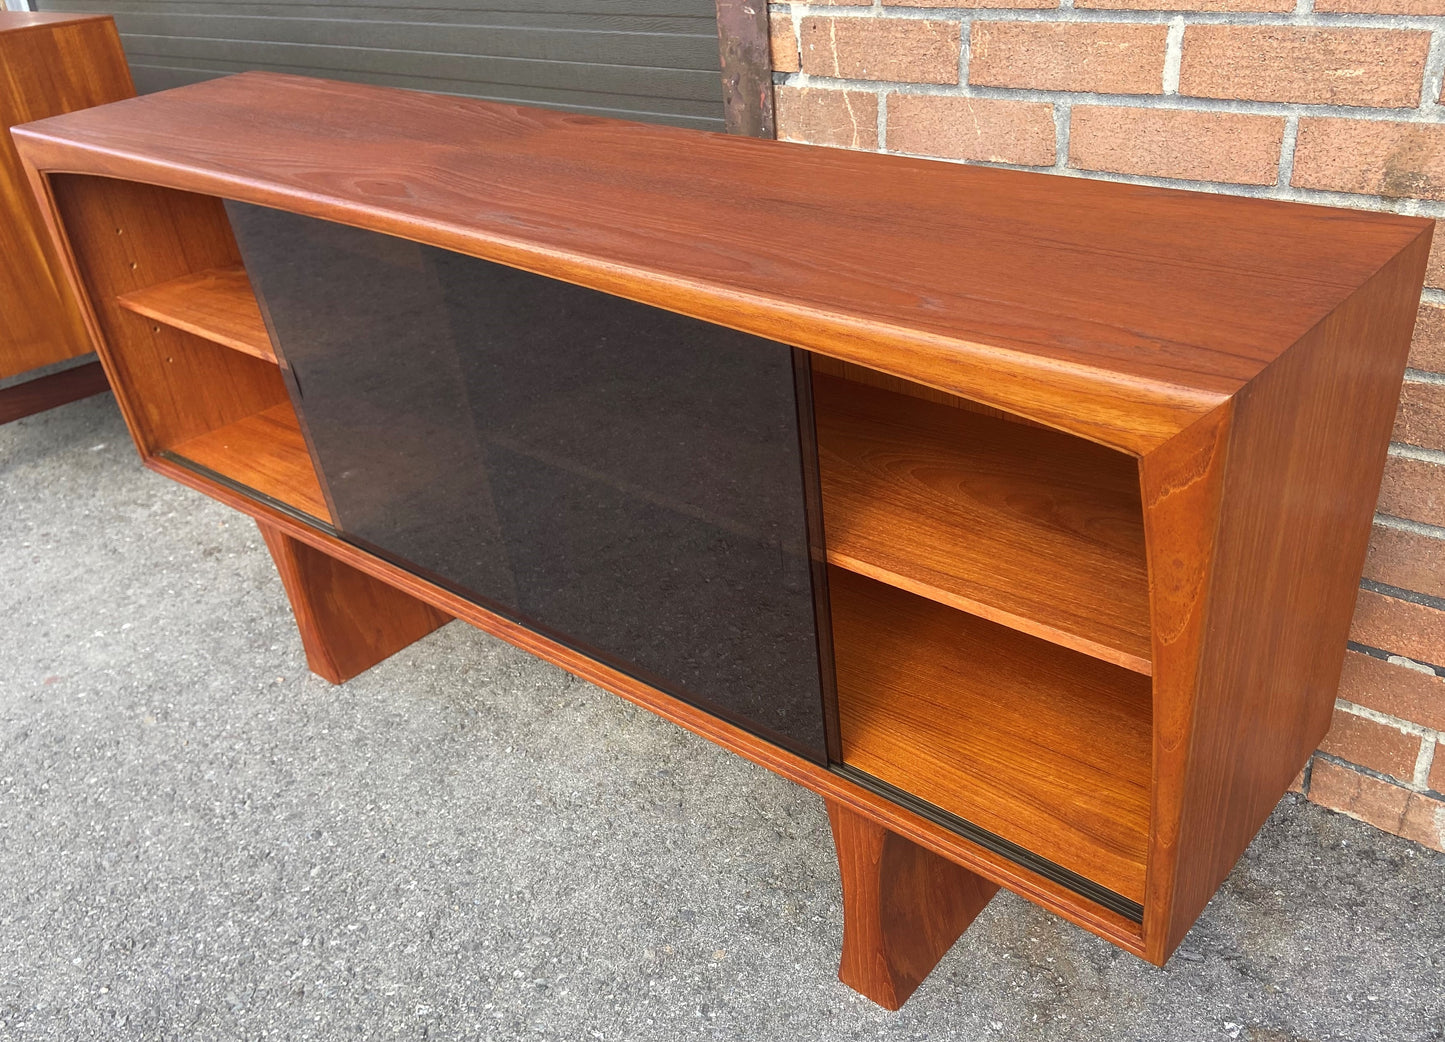 REFINISHED Mid Century Modern Teak Media TV Console 5 ft Perfect